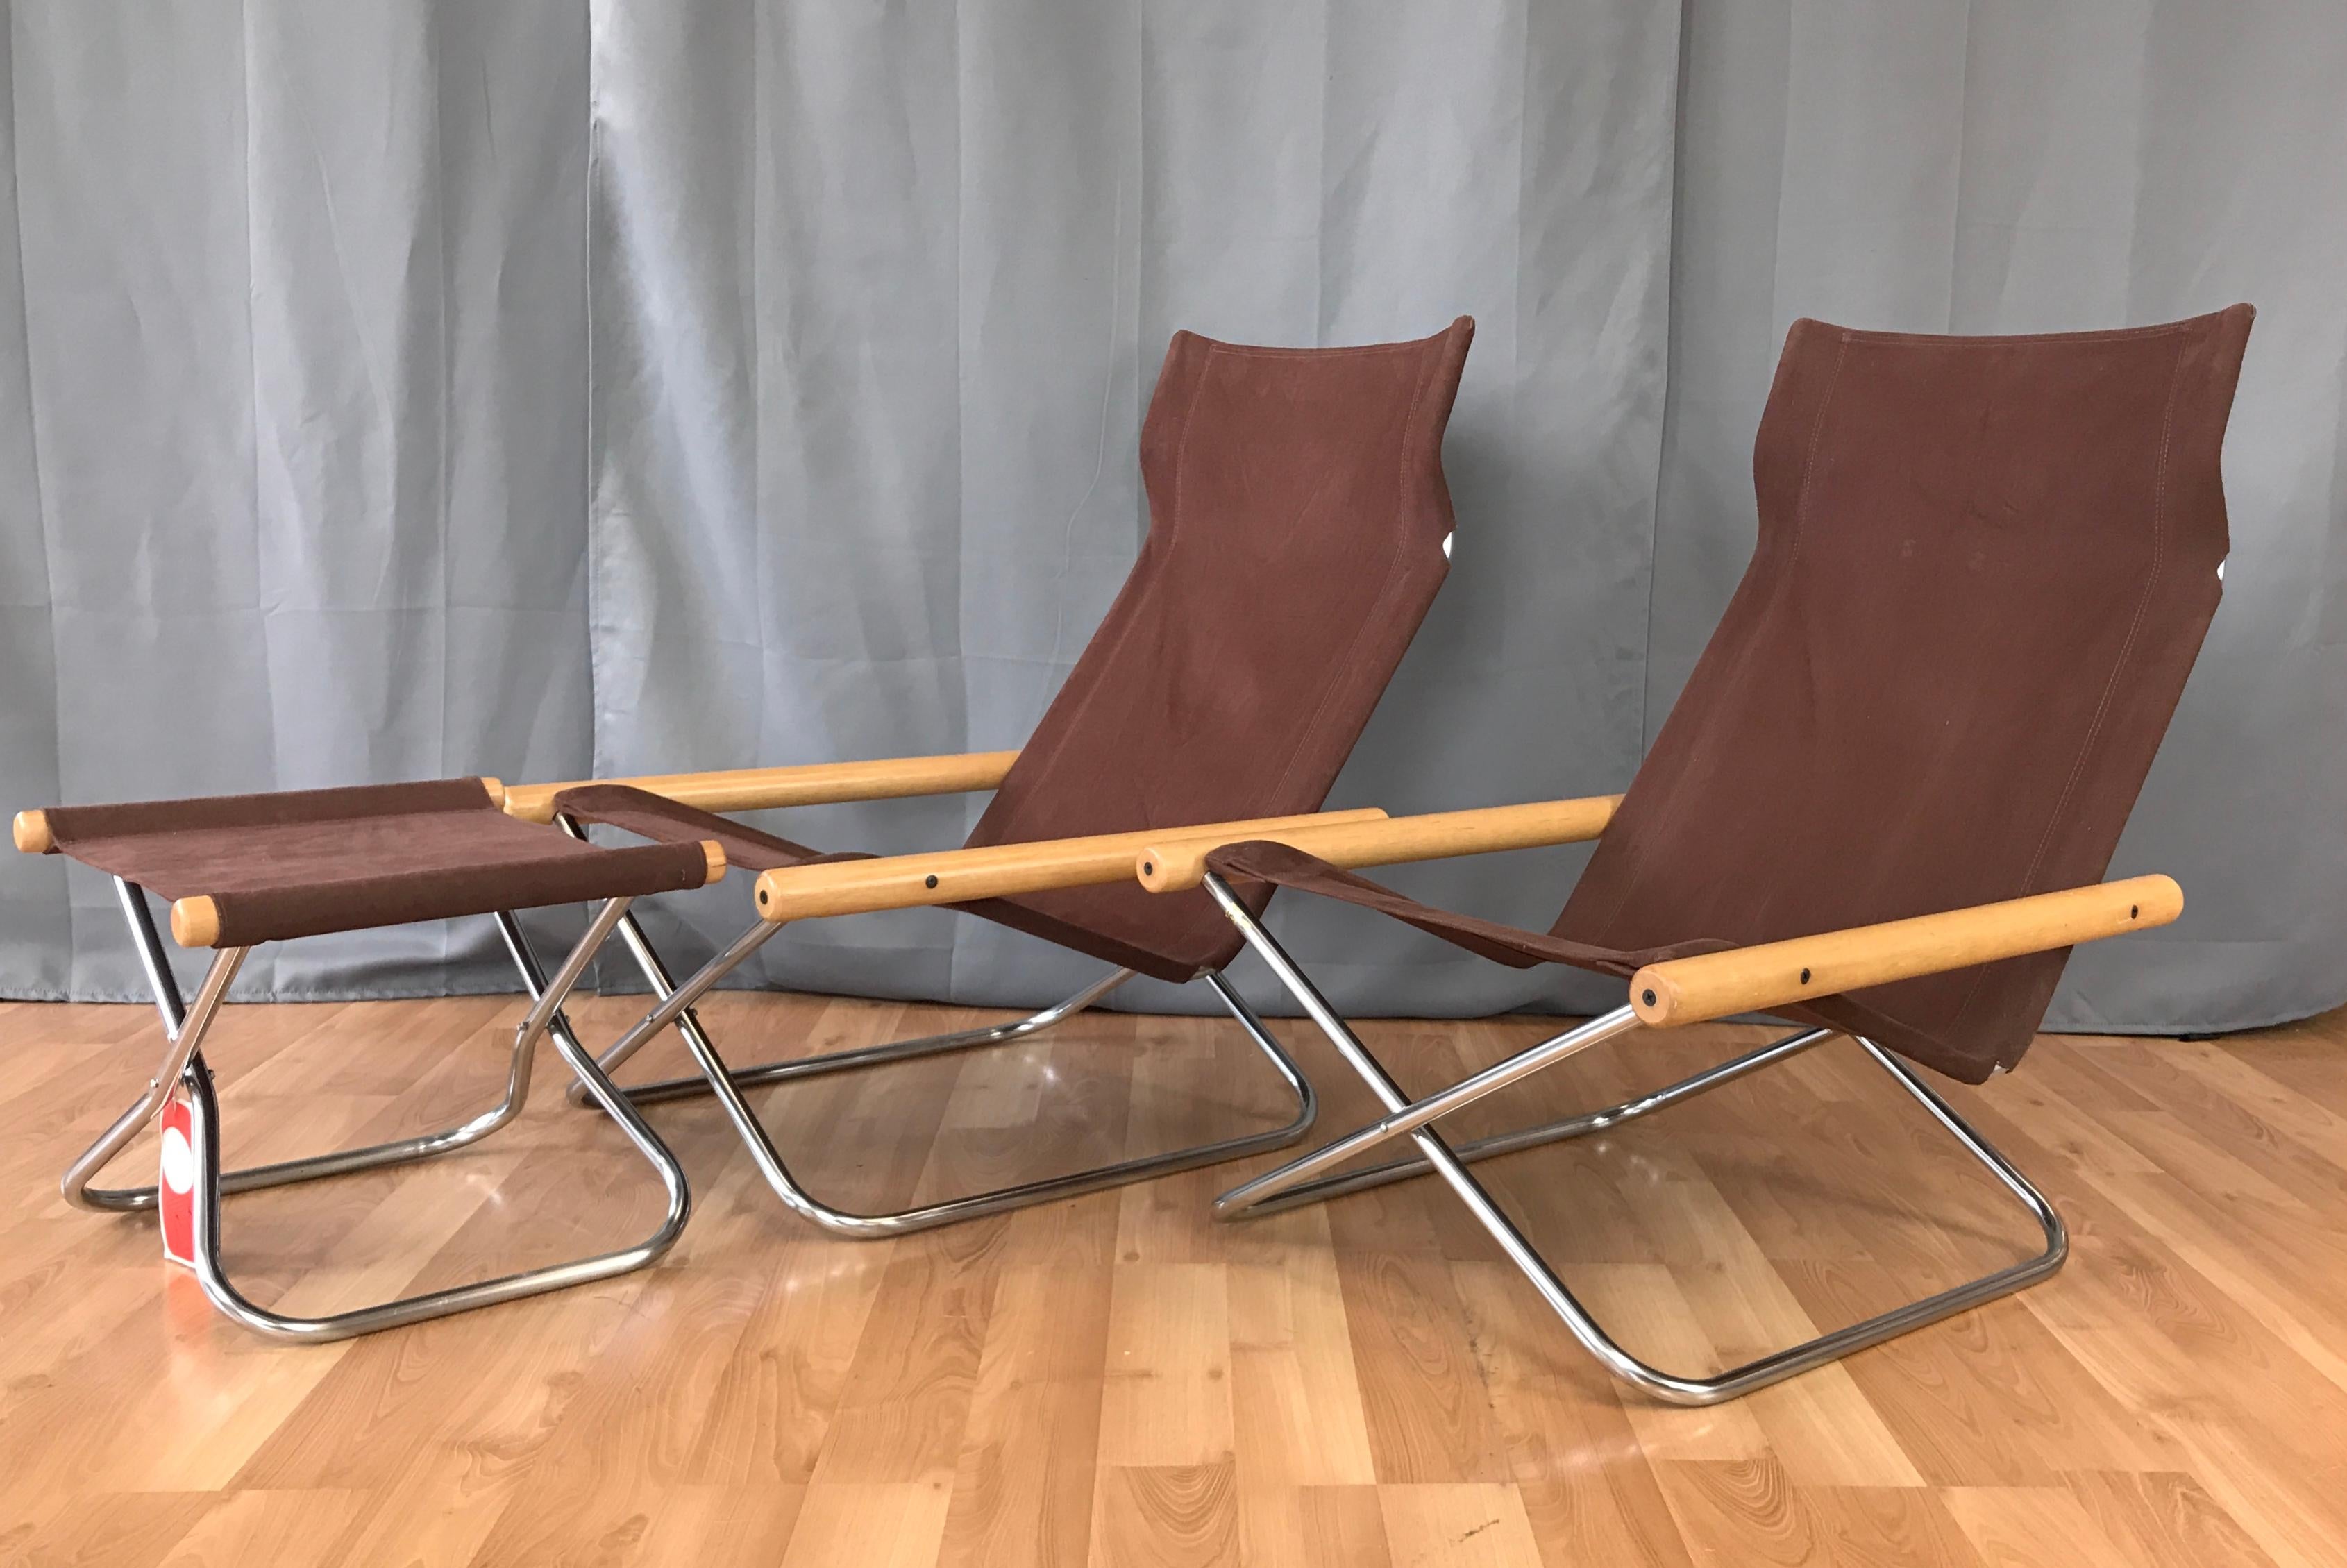 An exceptional late 1950s three-piece NY folding chairs & ottoman set by Takeshi Nii for Trend Pacific Inc.

Inspired by the iconic Hollywood director’s chair and key elements of Scandinavian Modern design, the NY chair—which references both the